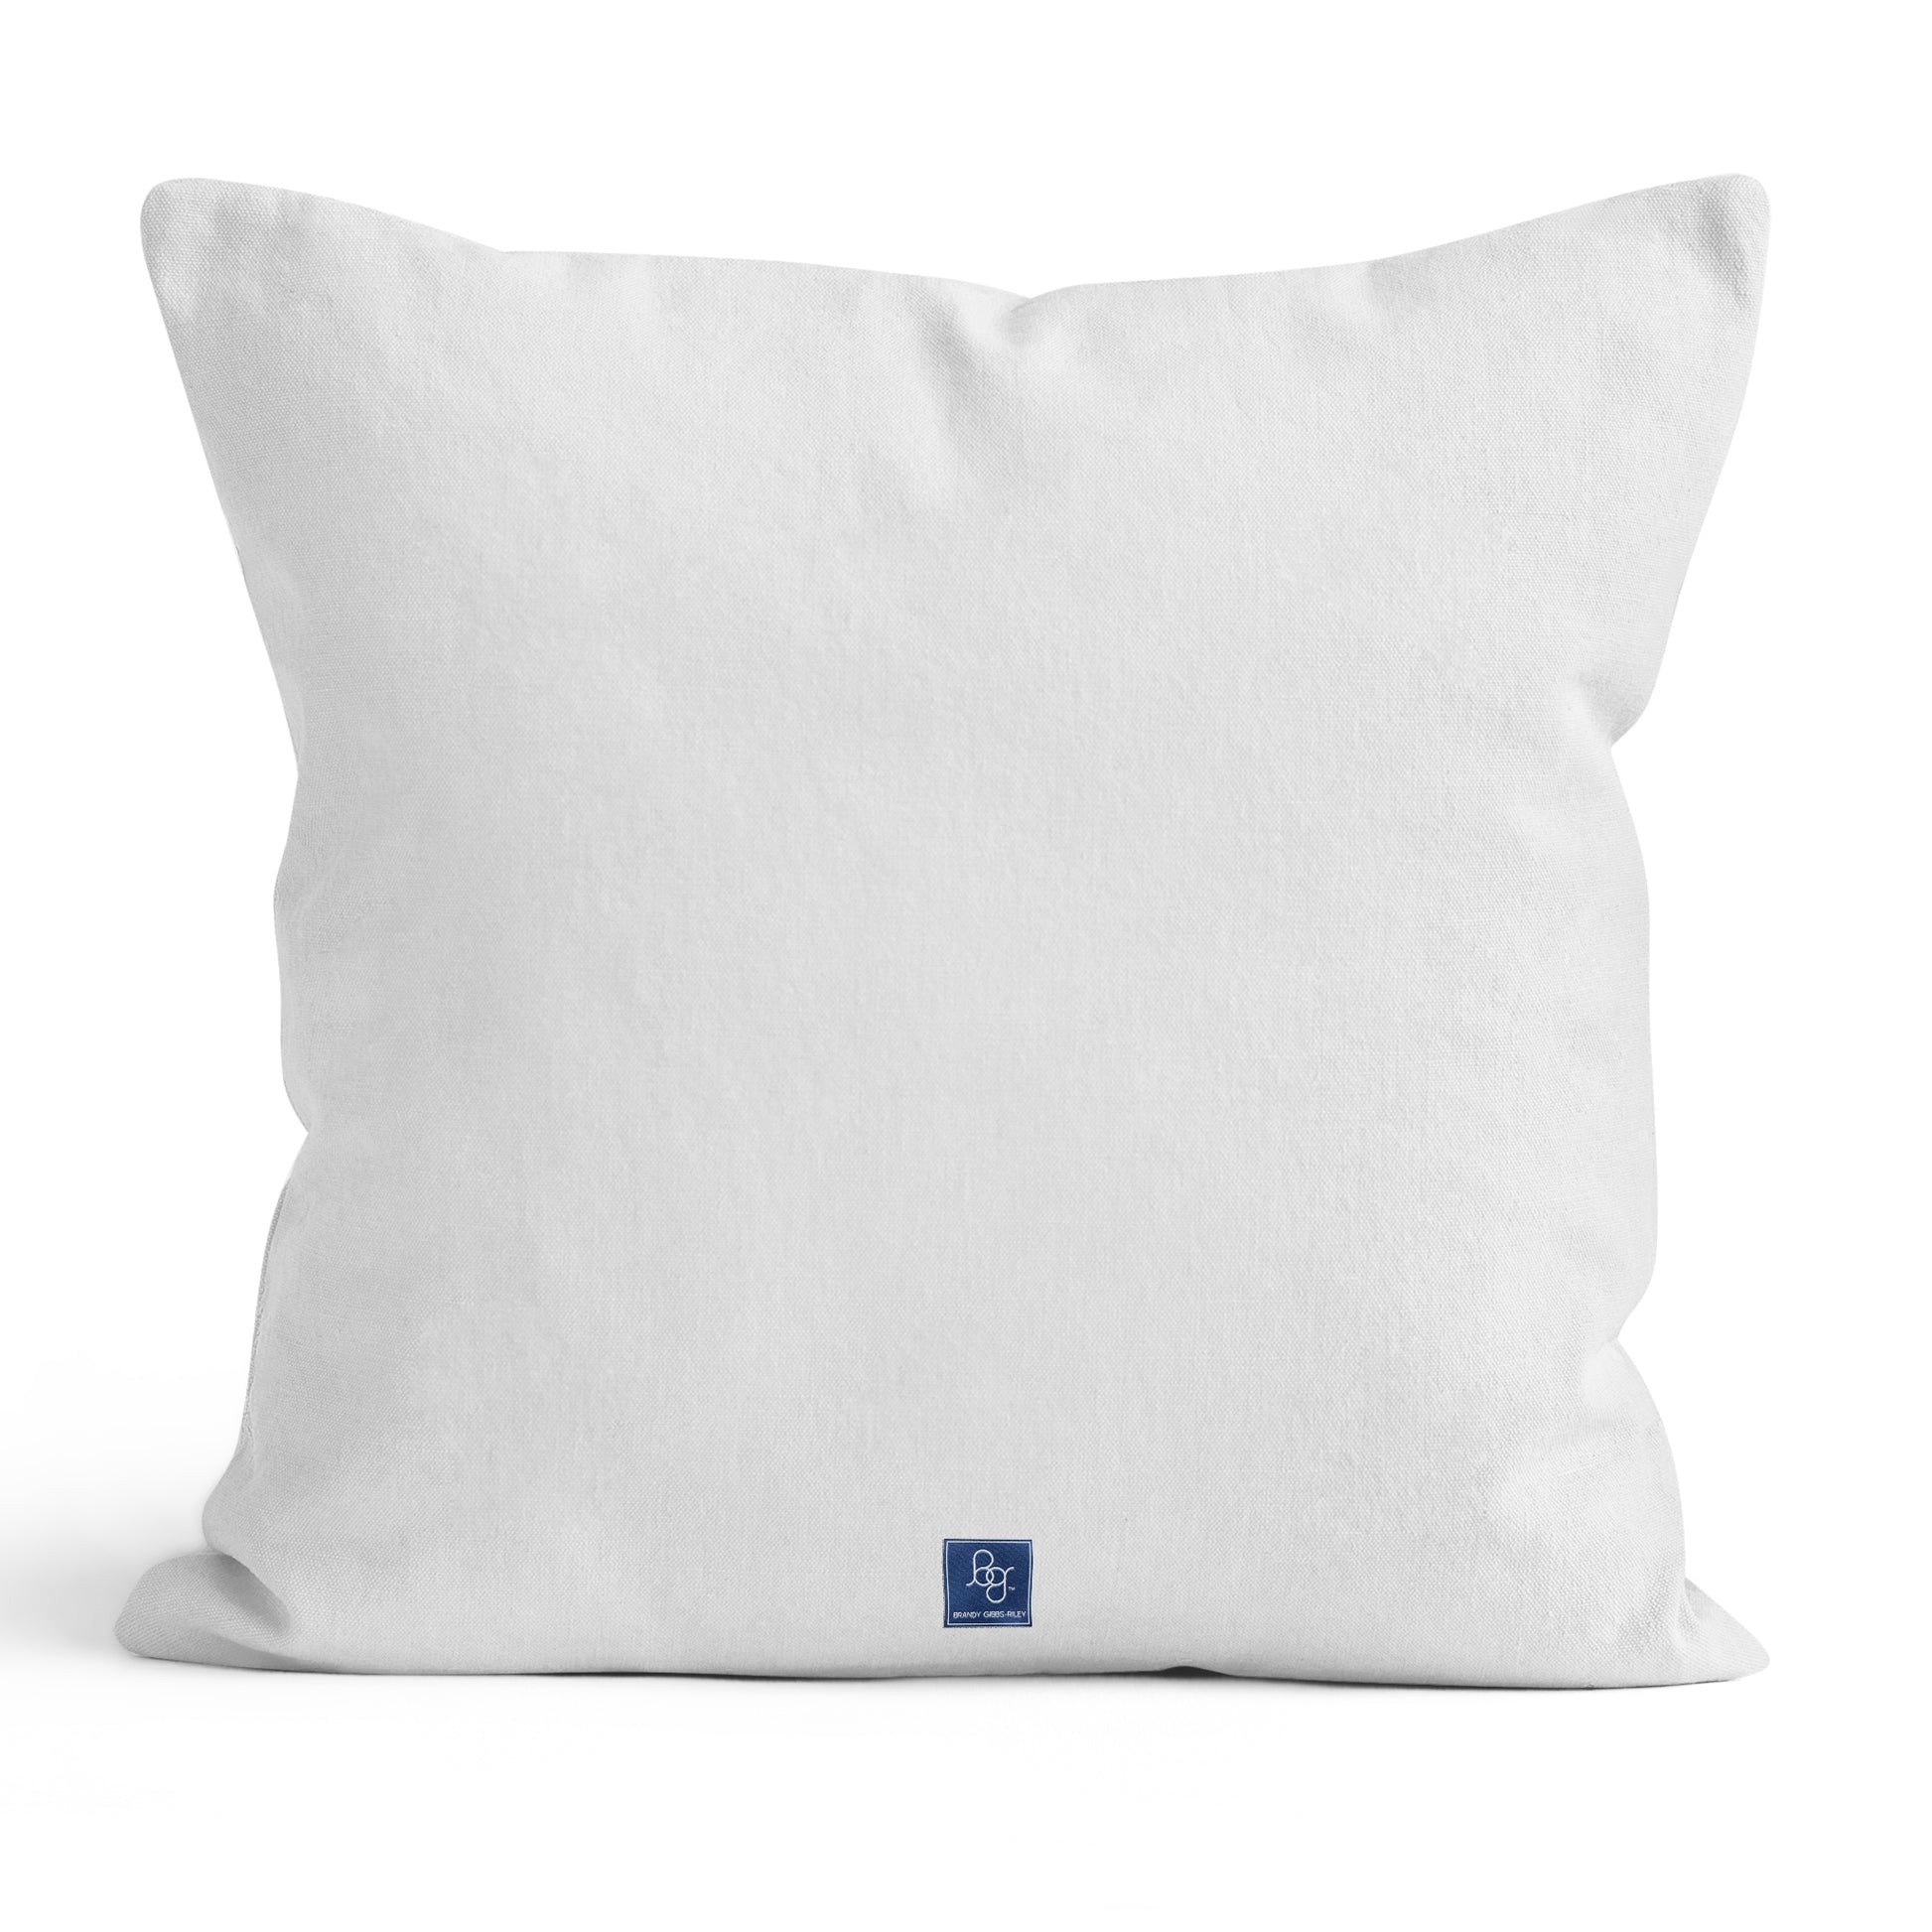 Solid white back of throw pillow featuring a navy blue label